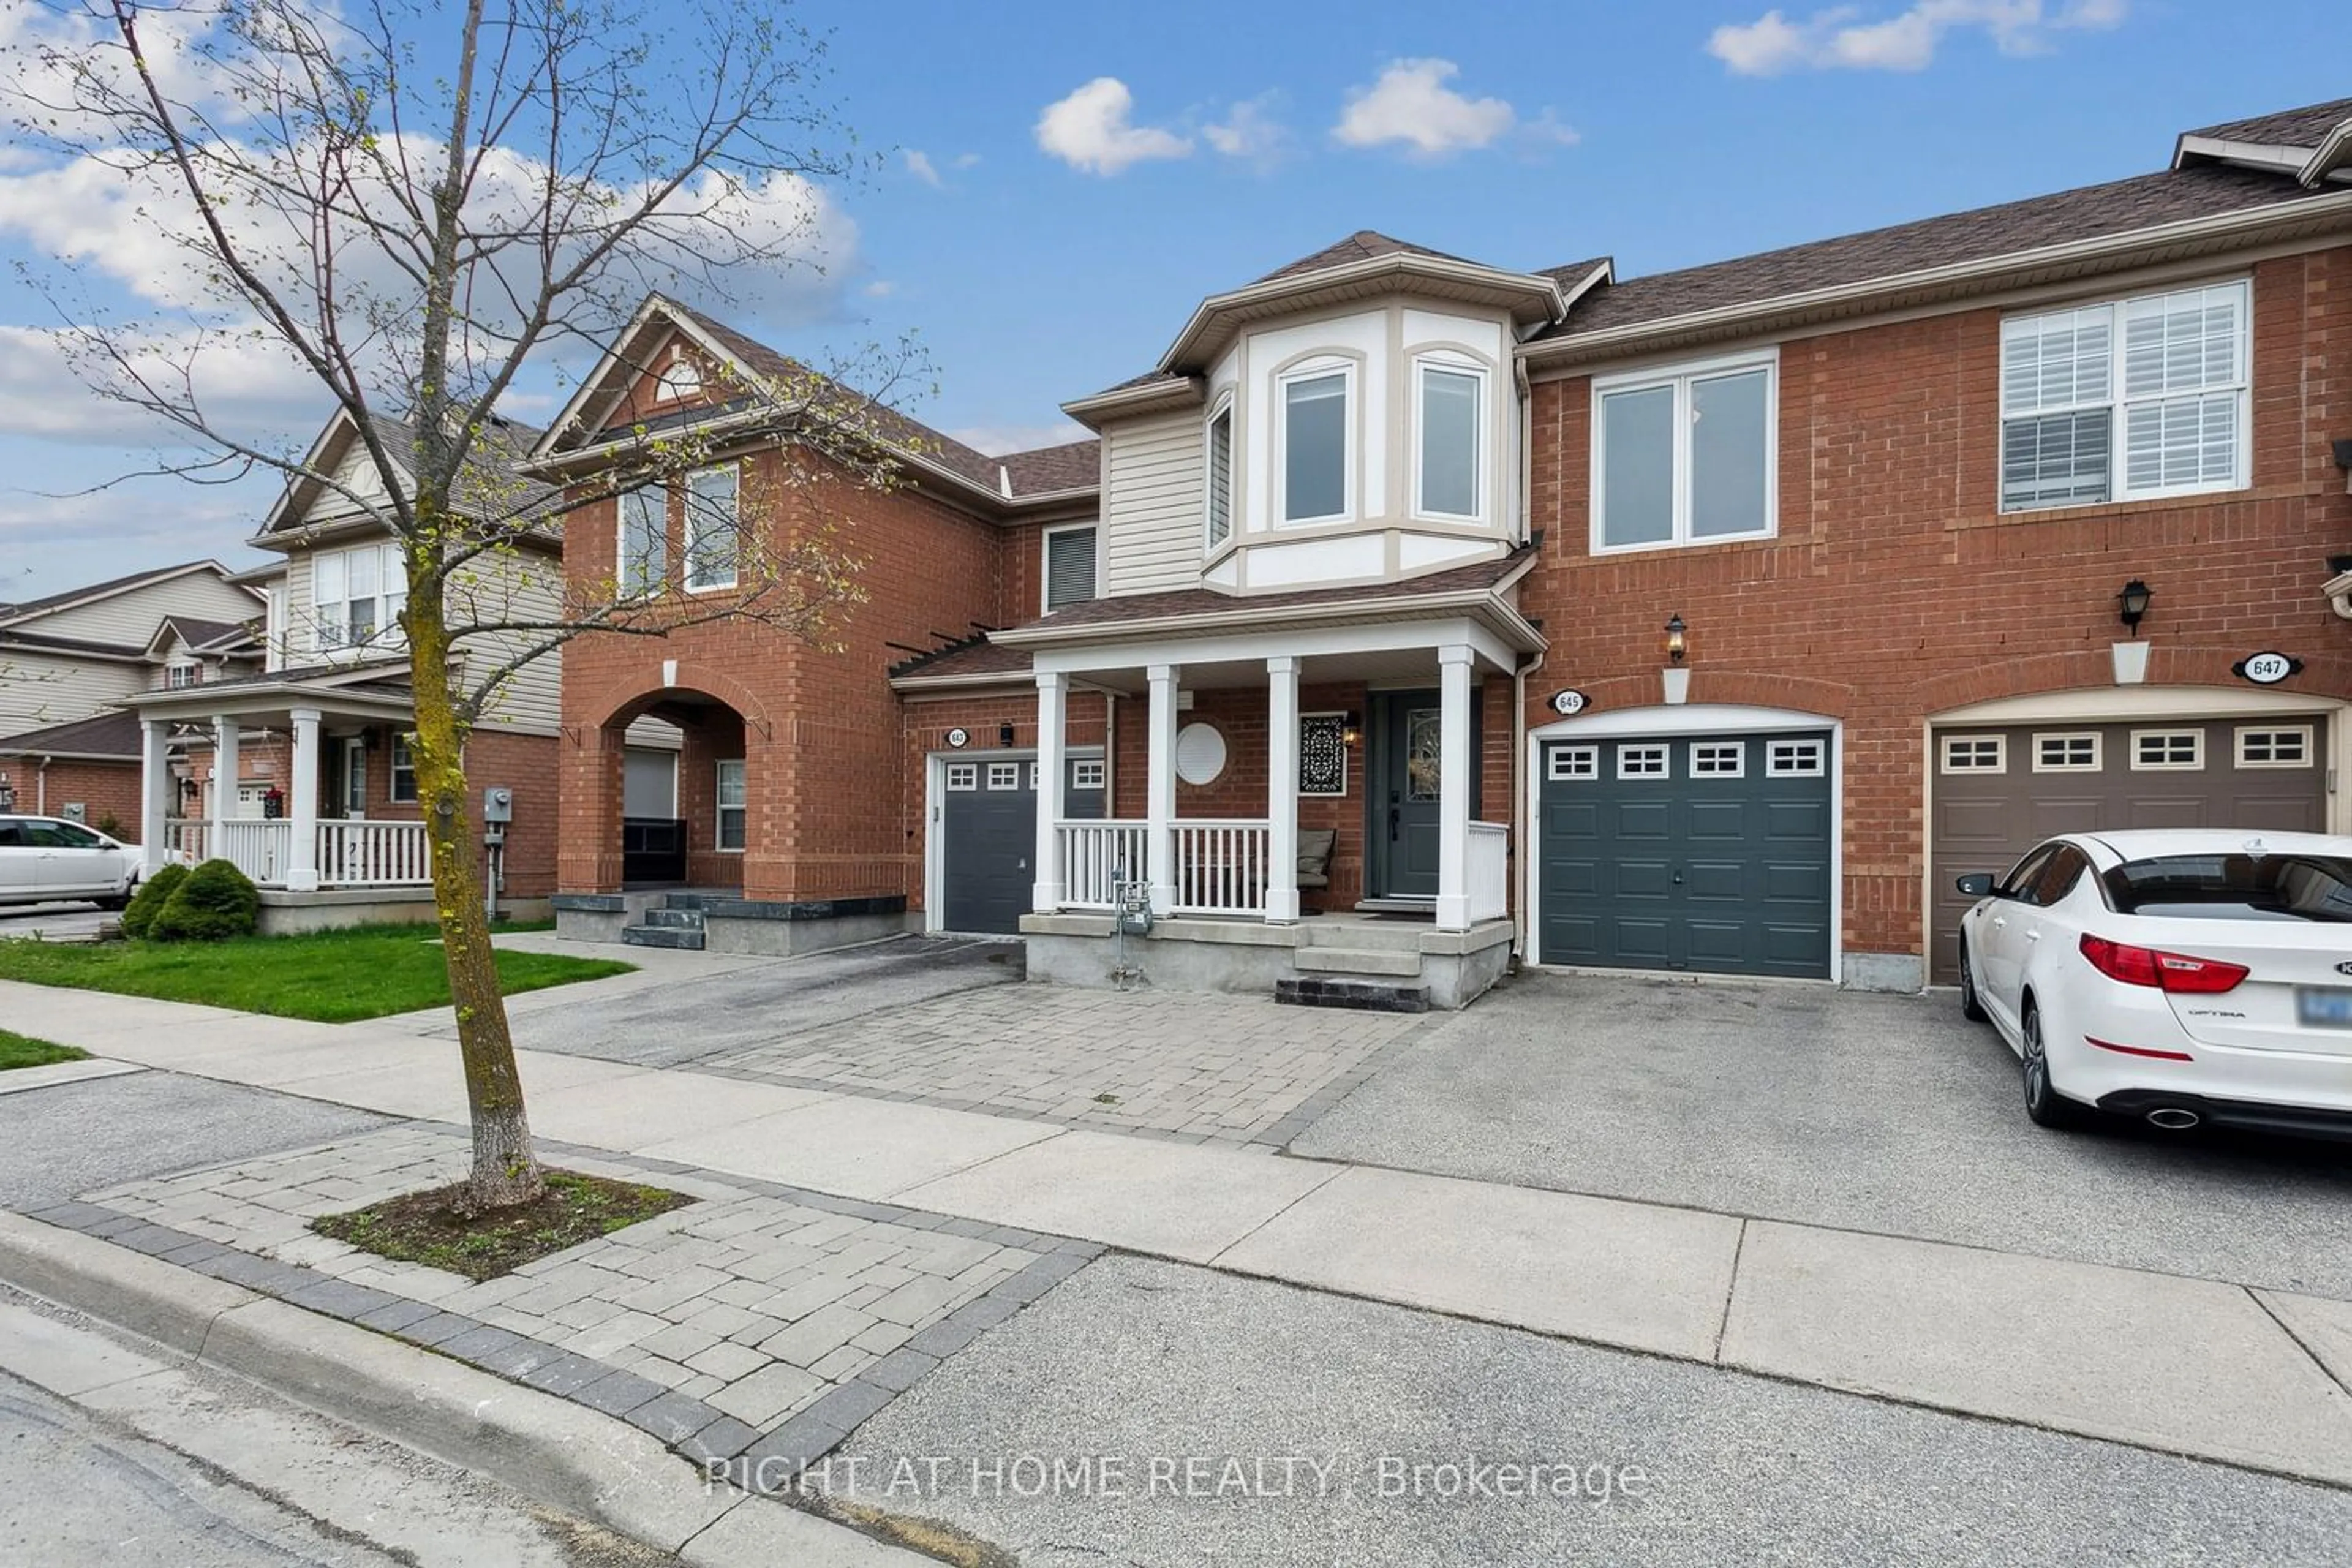 Home with brick exterior material for 645 Porter Way, Milton Ontario L9T 5W2